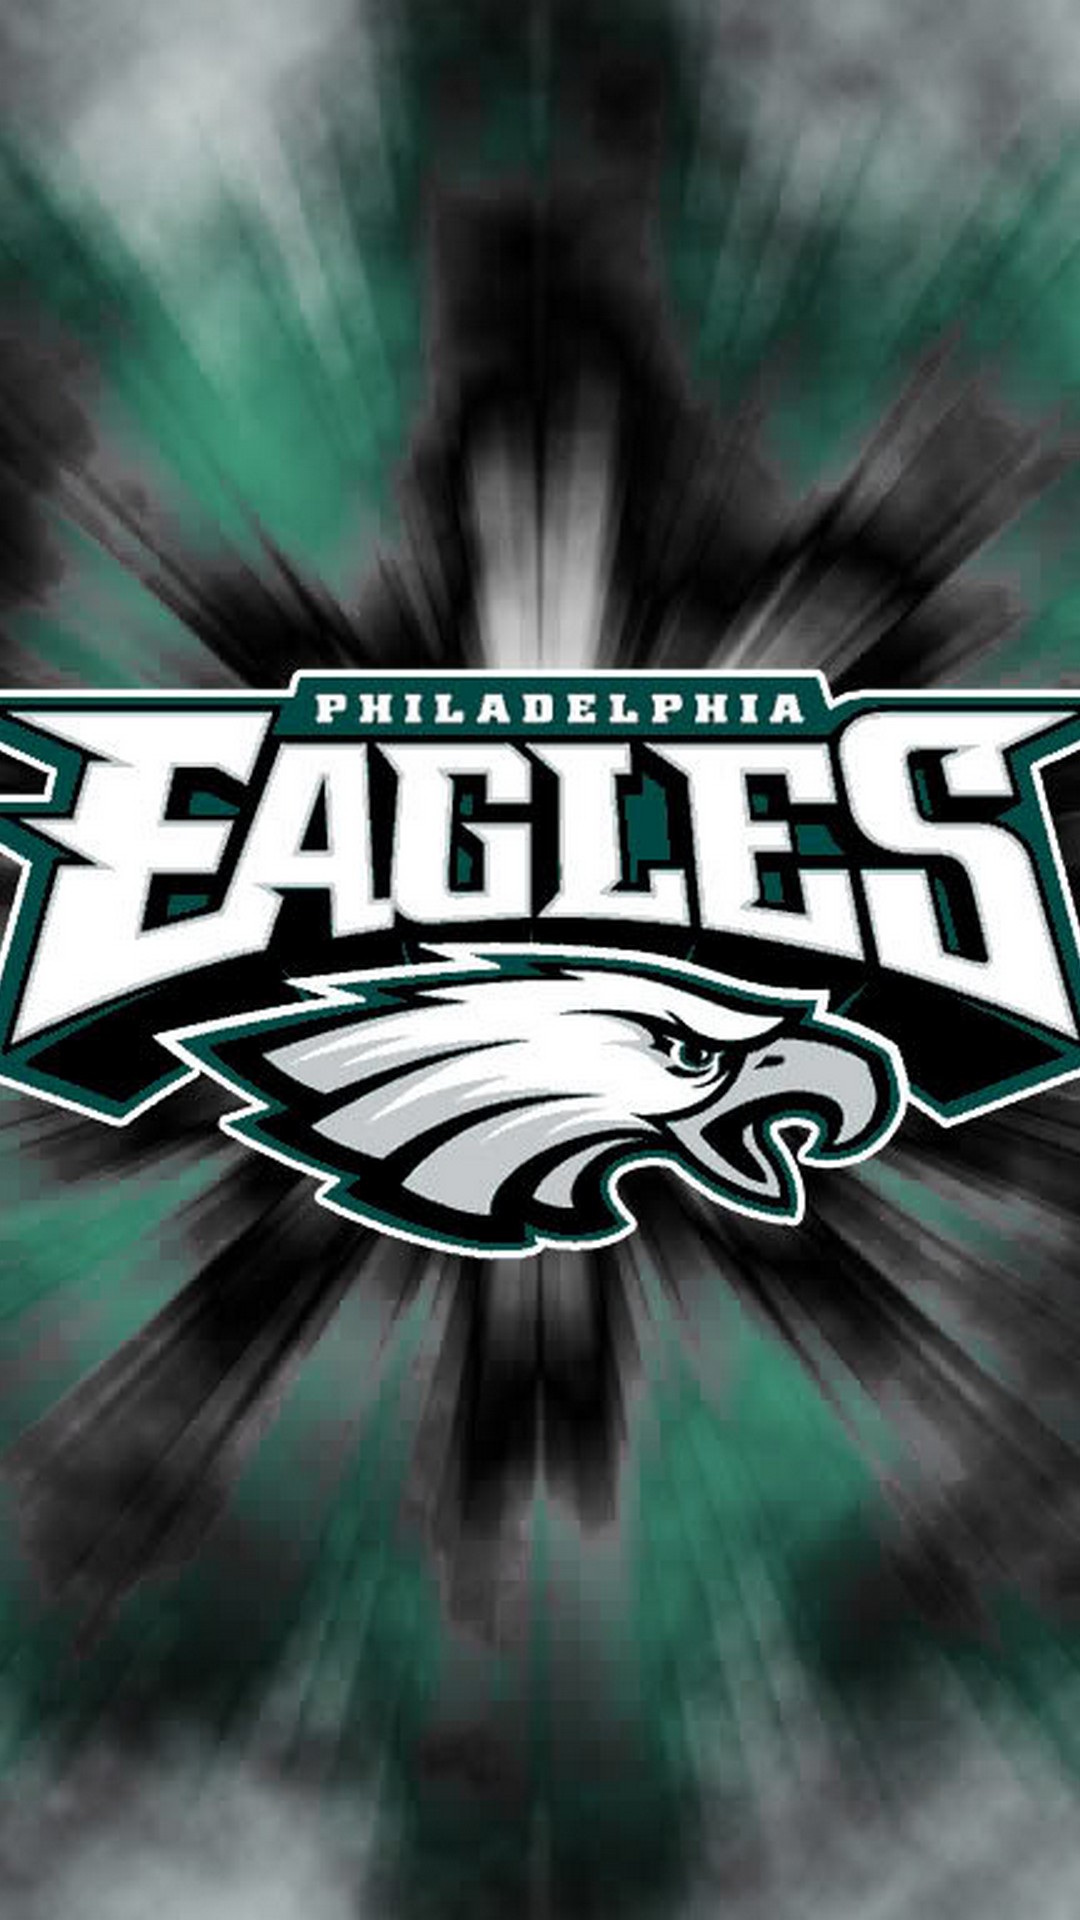 The Eagles HD Wallpaper For iPhone With Resolution 1080X1920 pixel. You can make this wallpaper for your Mac or Windows Desktop Background, iPhone, Android or Tablet and another Smartphone device for free